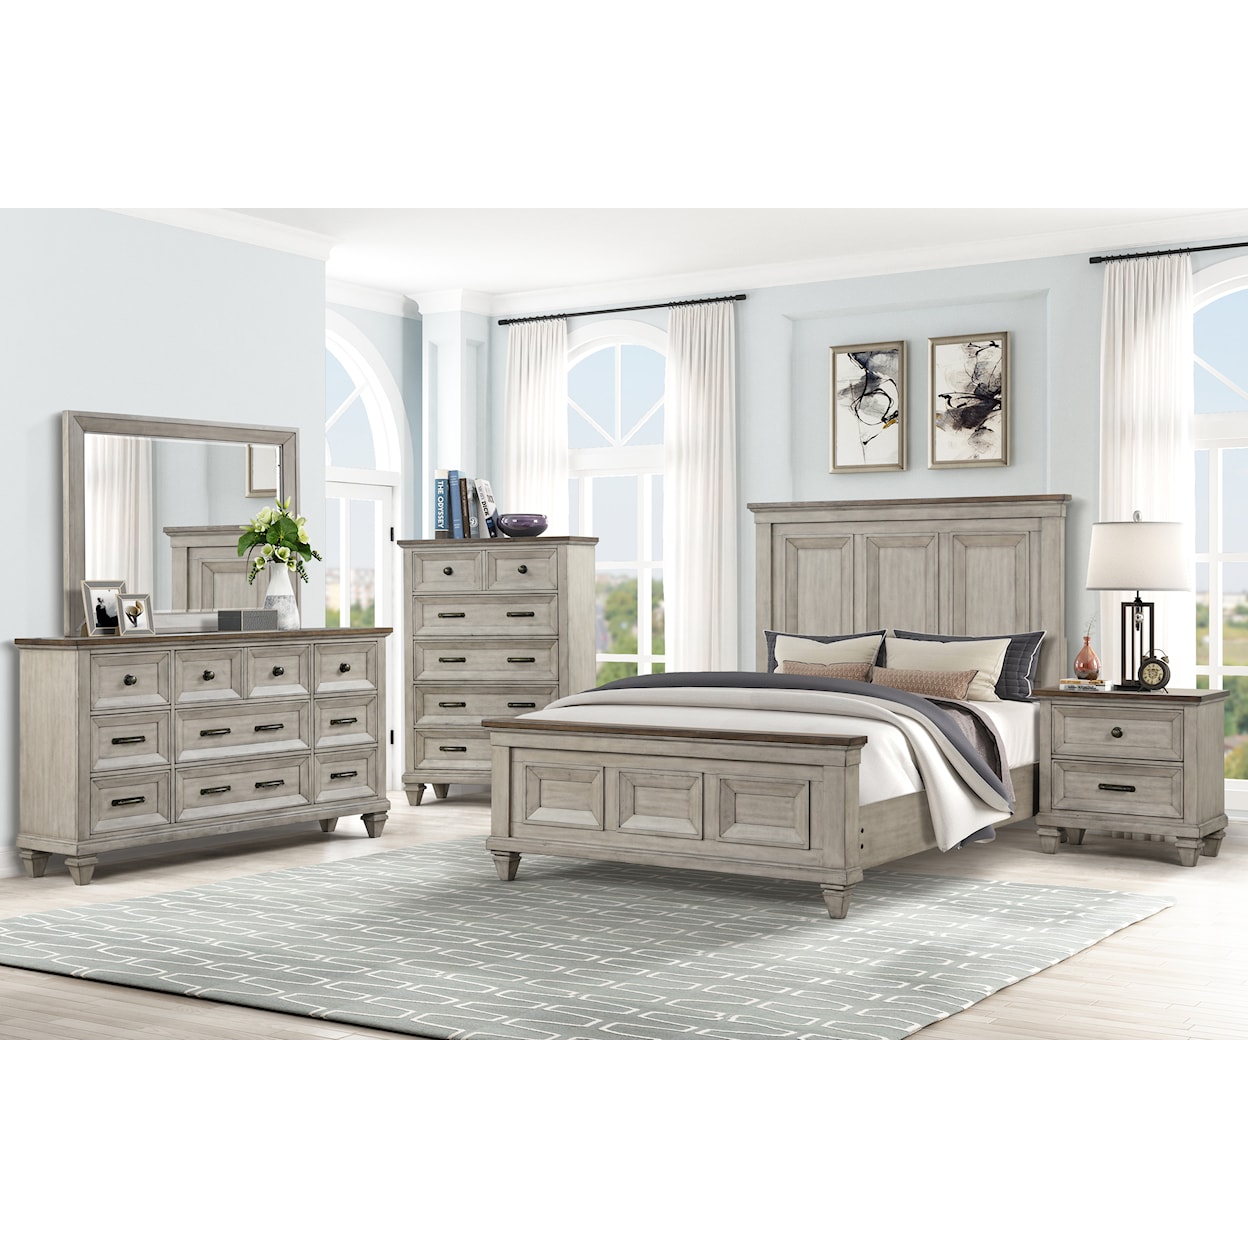 New Classic Mariana Queen Panel Bed